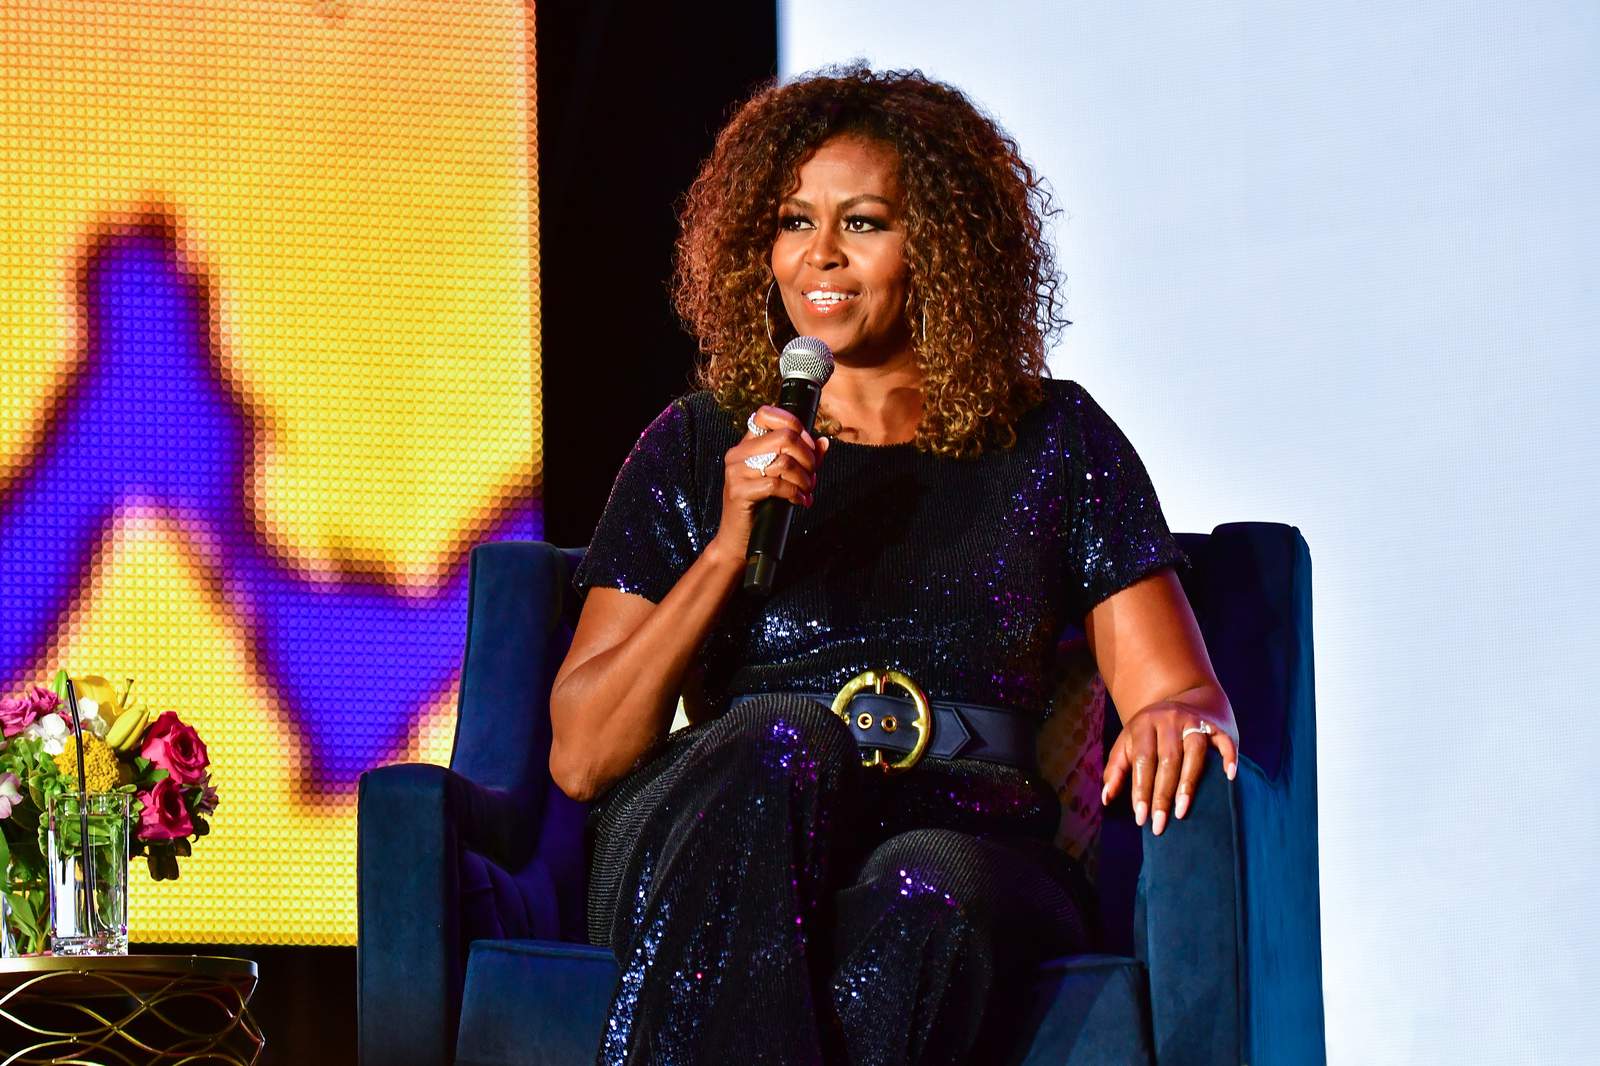 Michelle Obama to host podcast on health, relationships